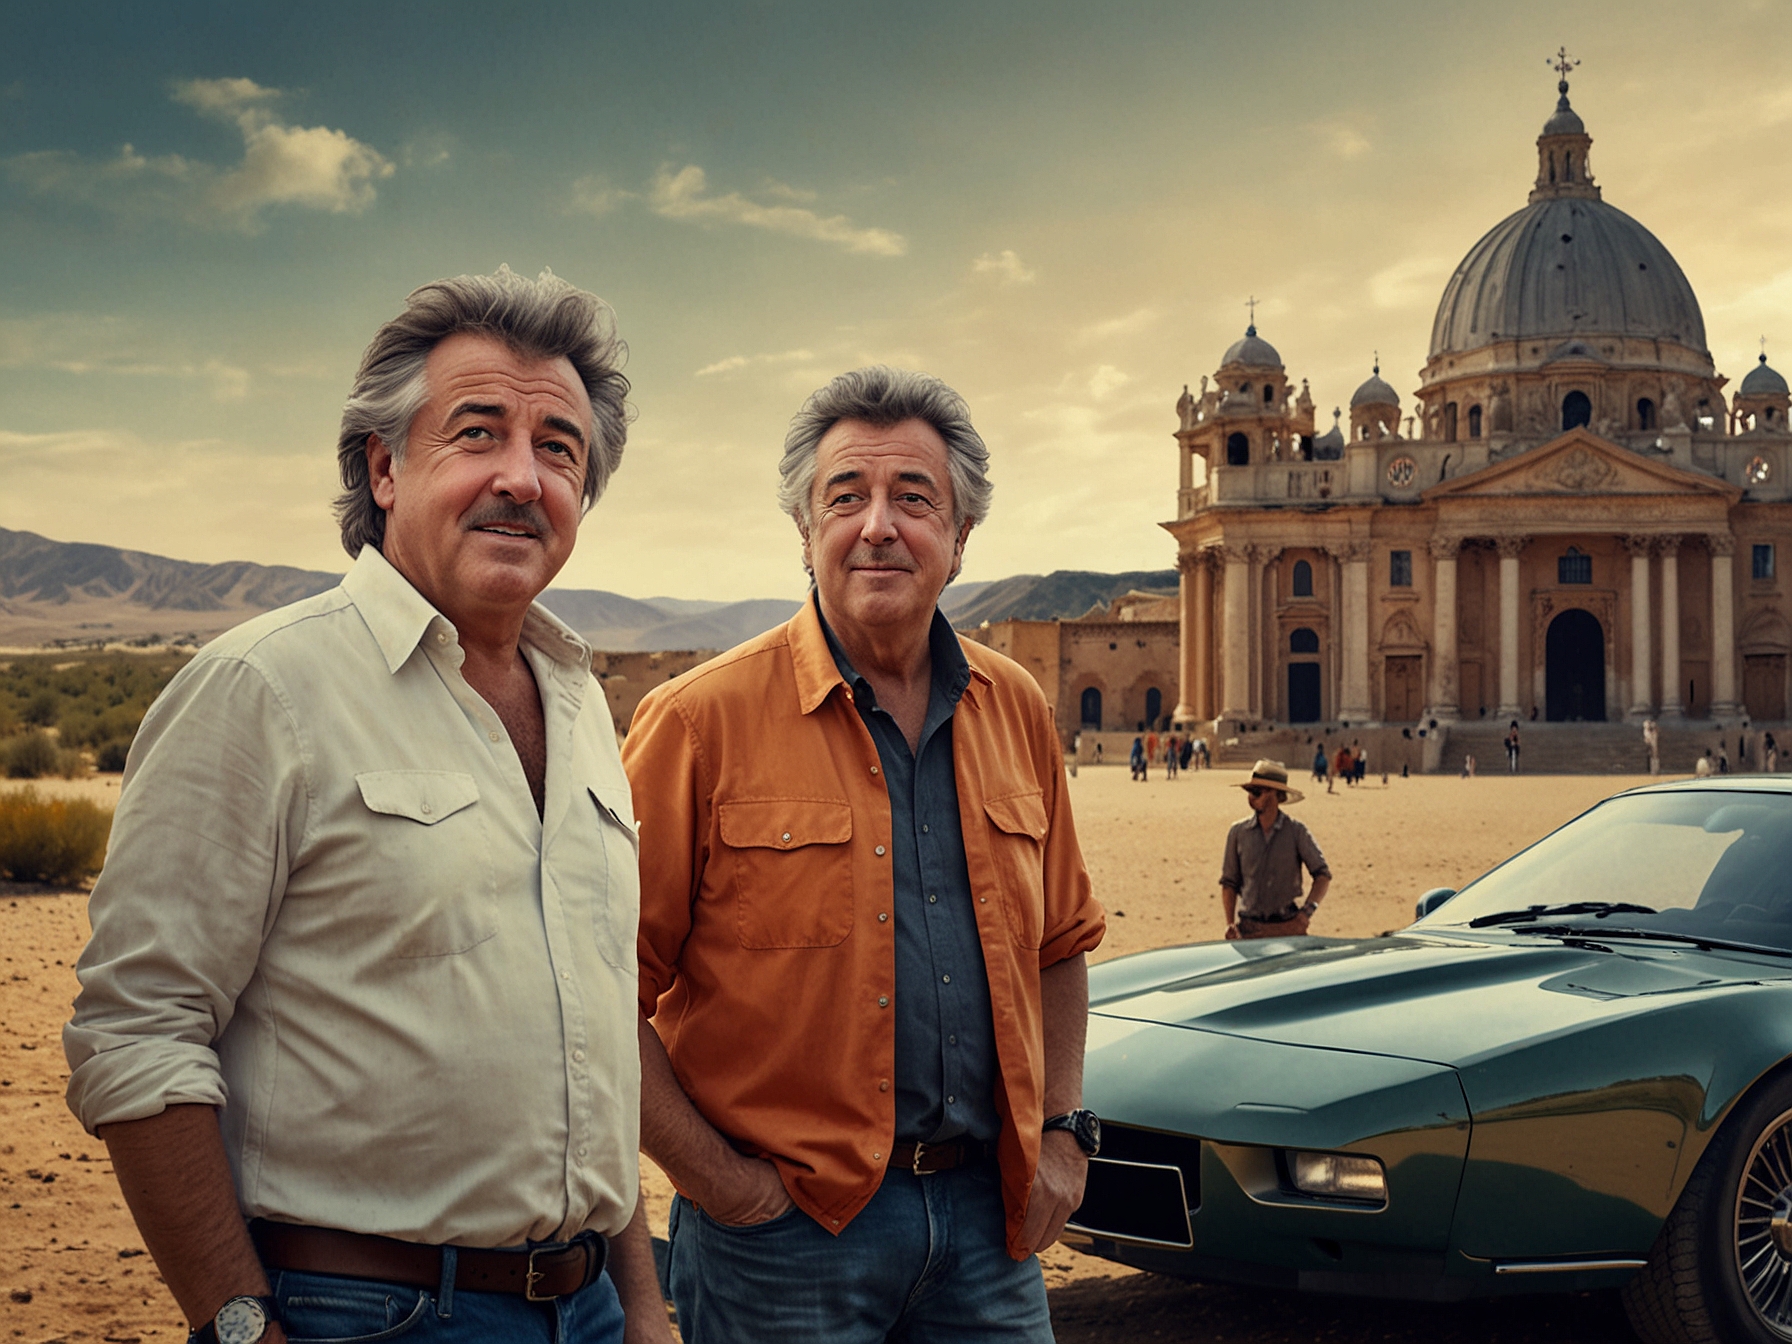 A behind-the-scenes photo of The Grand Tour, featuring the iconic trio in an exotic location, preparing for another of their exhilarating and humorous escapades.